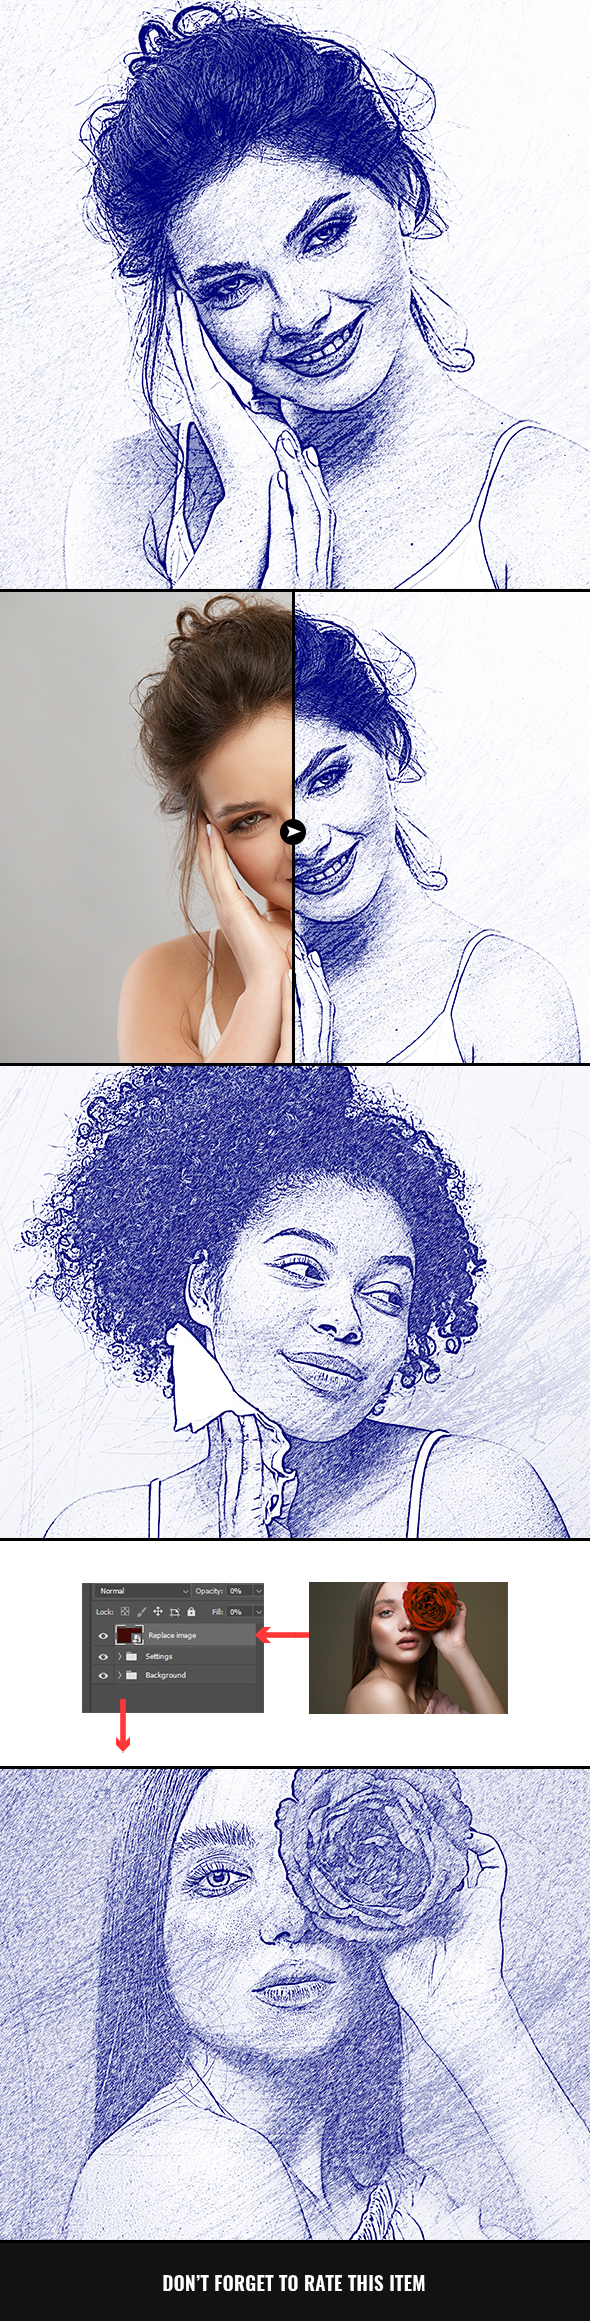 [DOWNLOAD]Sketching Photo Effect